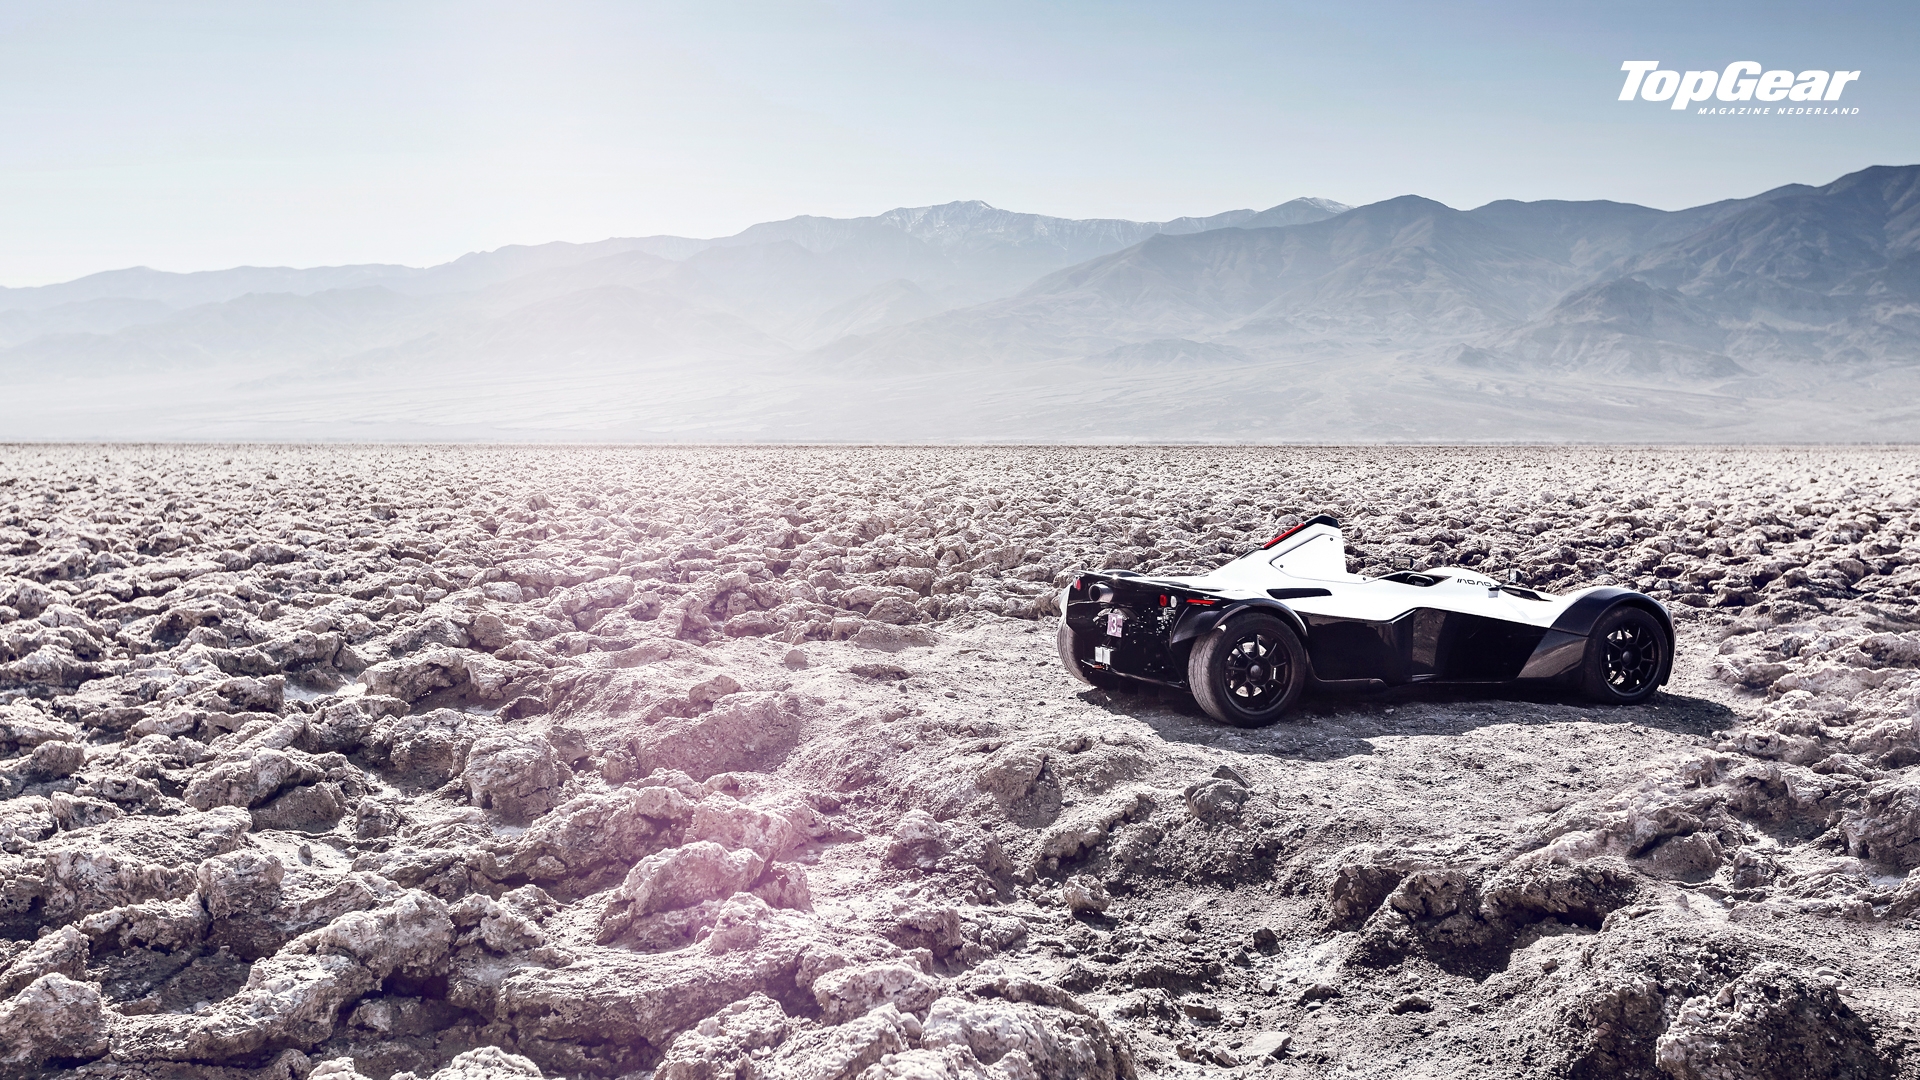 2013 BAC Mono In Death Valley CA by notbland